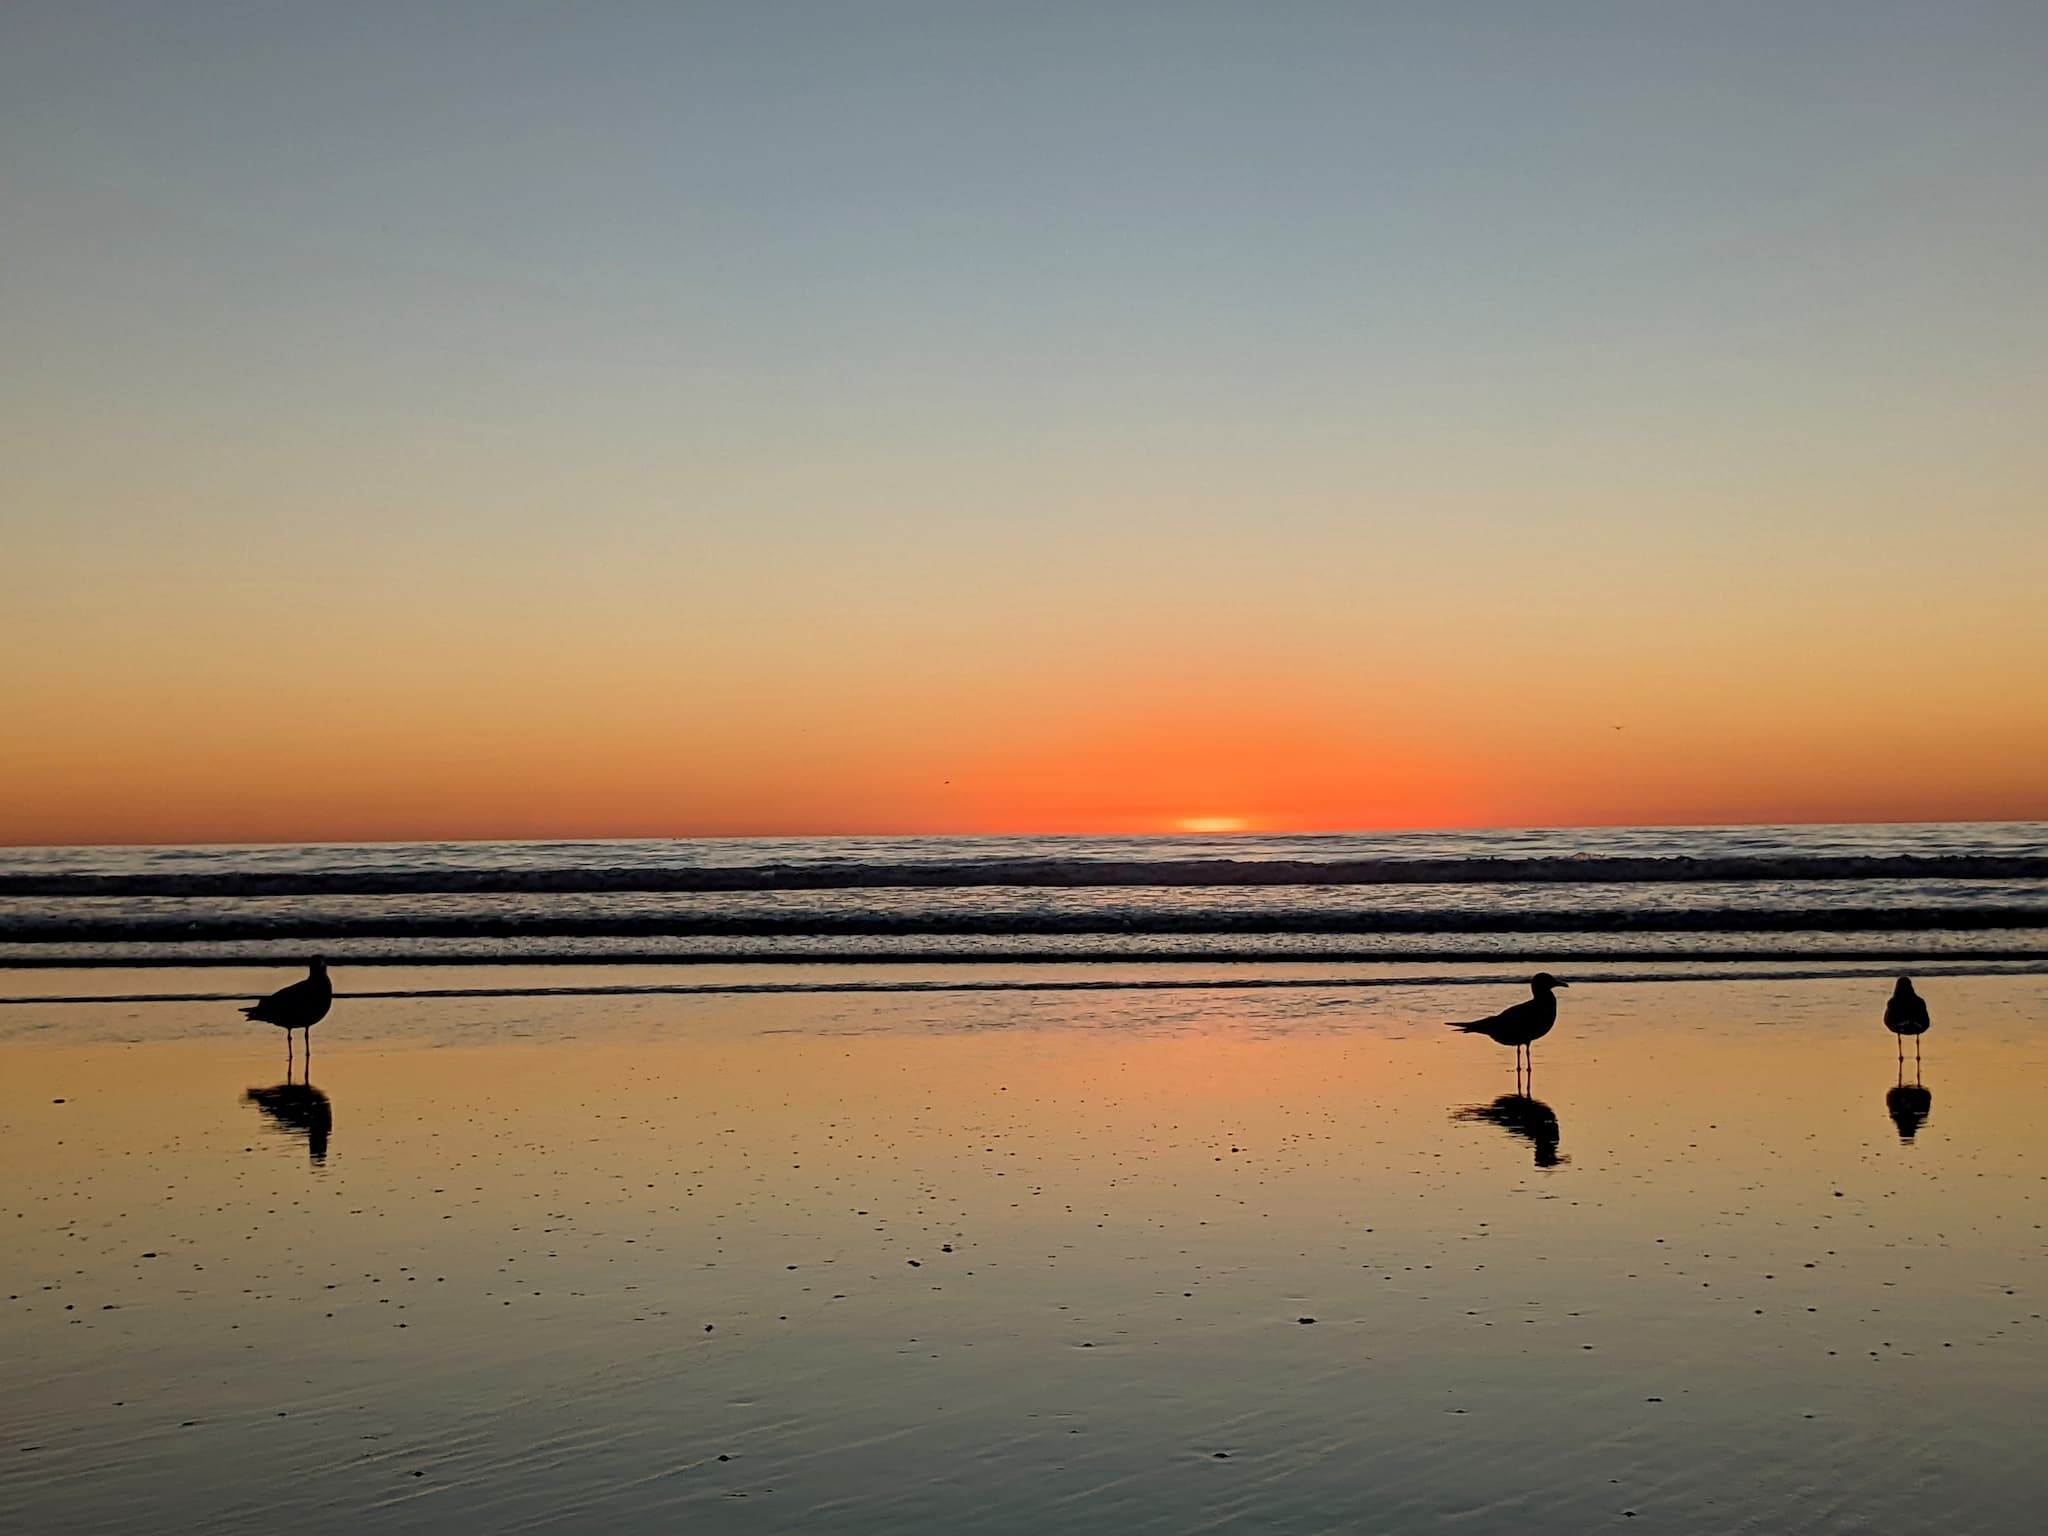 silhouettes of three seagulls standing at the edge of a flat, reflective beach as the sun sets behind them.